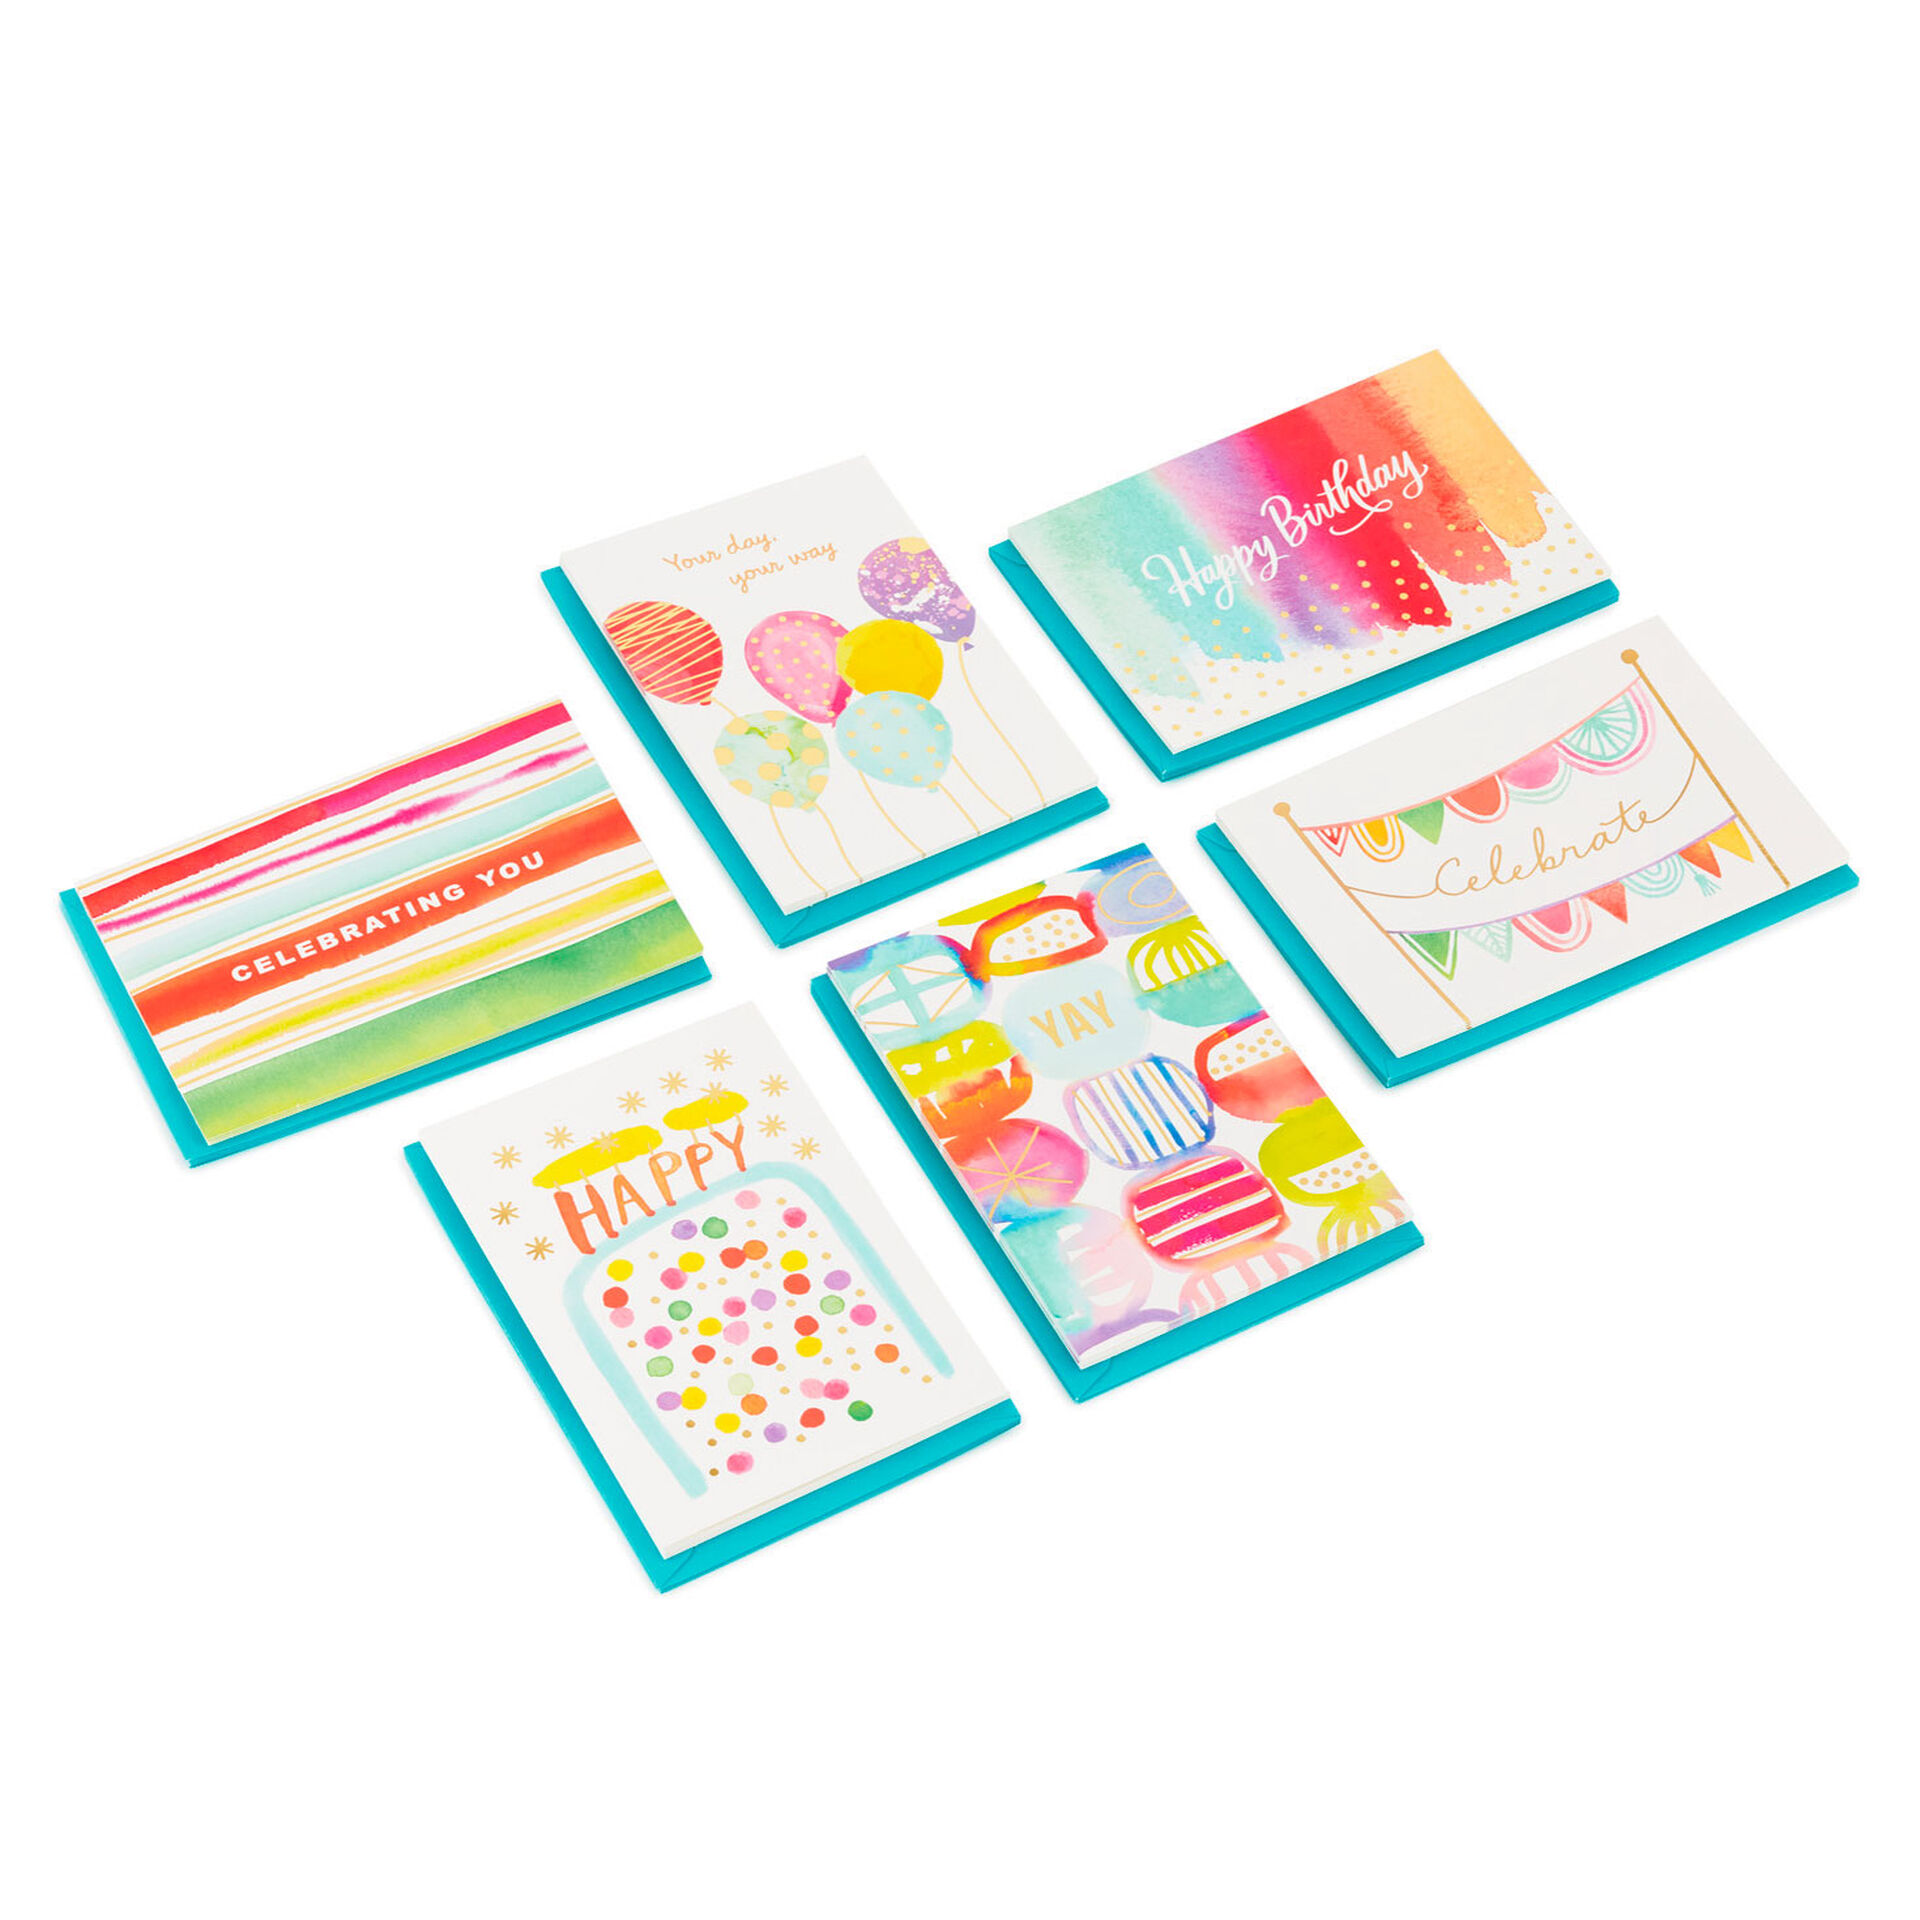 Assorted-Bright-Watercolor-Boxed-Birthday-Cards_5STZ1107_02